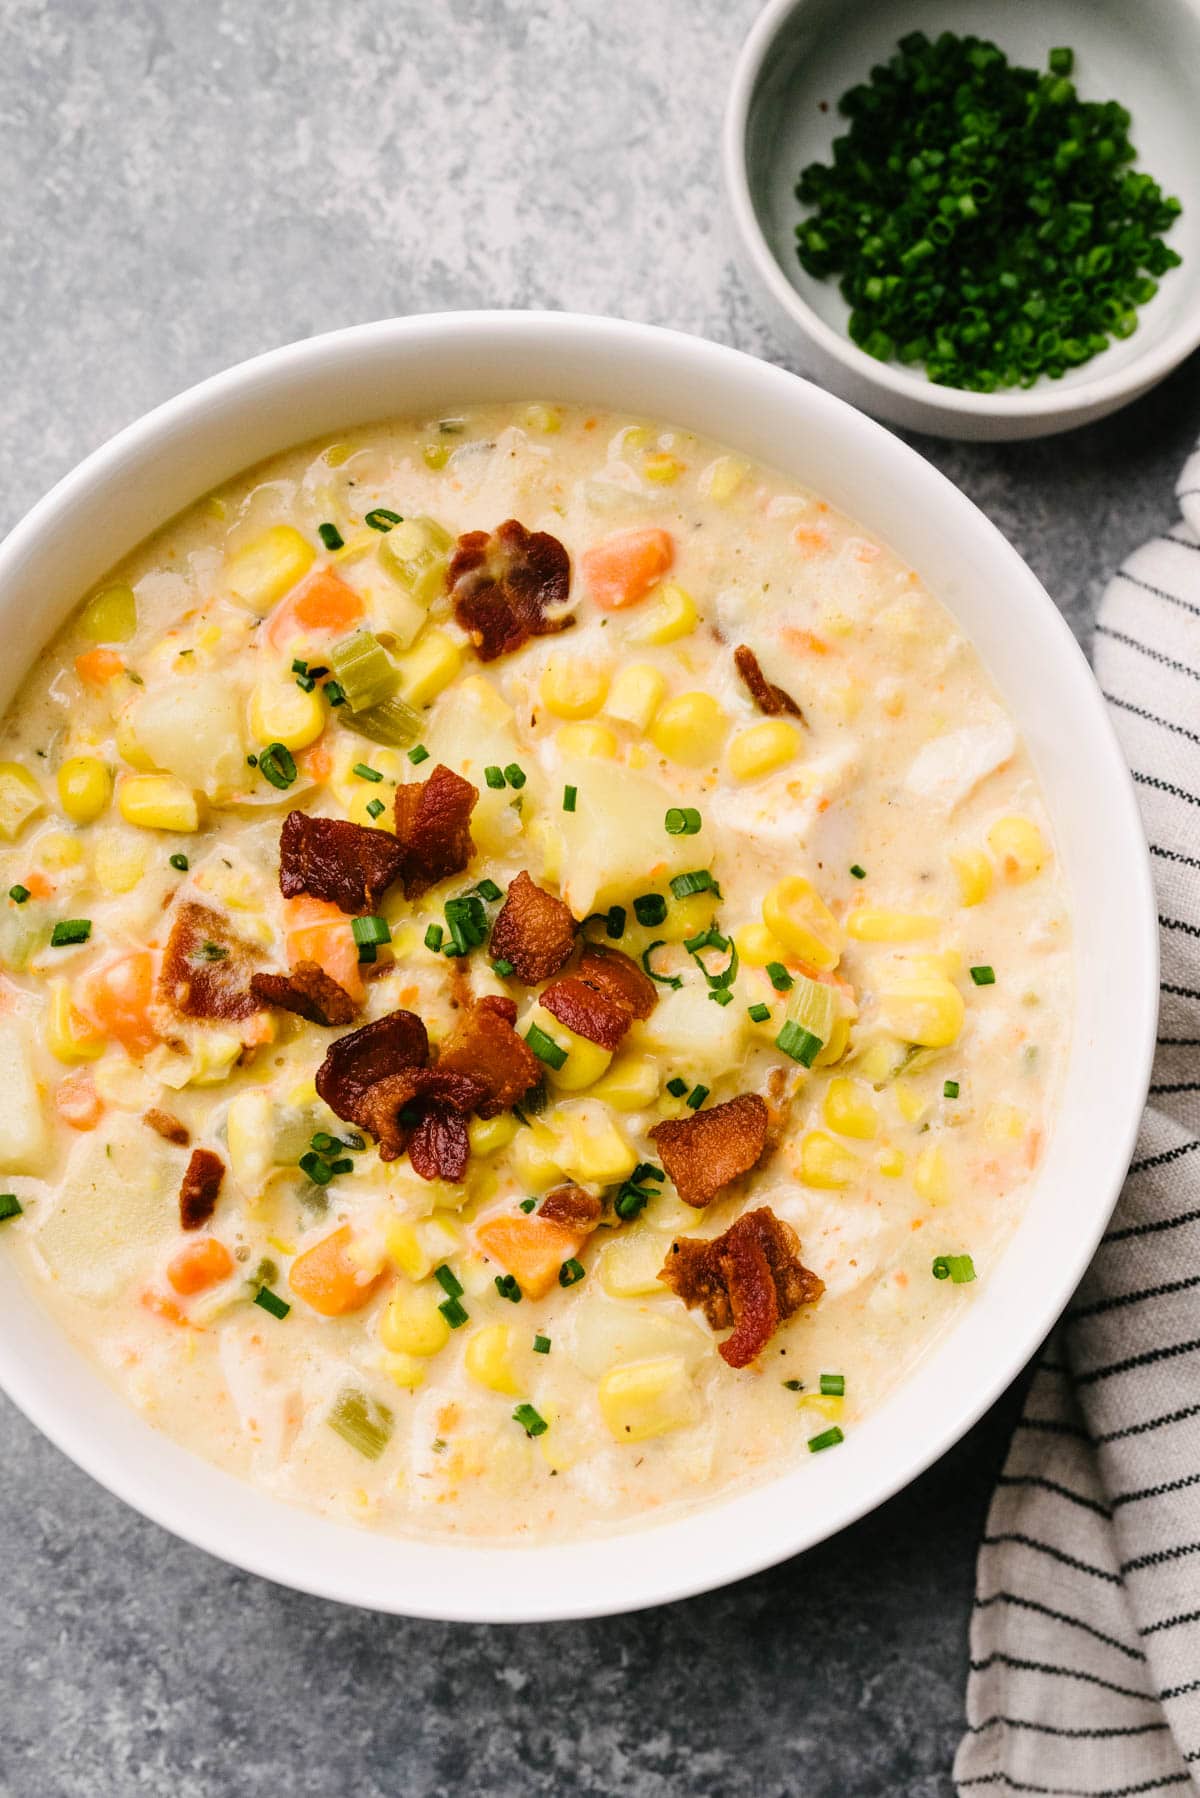 A bowl of turkey corn chowder garnished with crispy bacon and fresh chives on a concrete background; a striped linen napkin and small bowl of fresh chives are to the side.